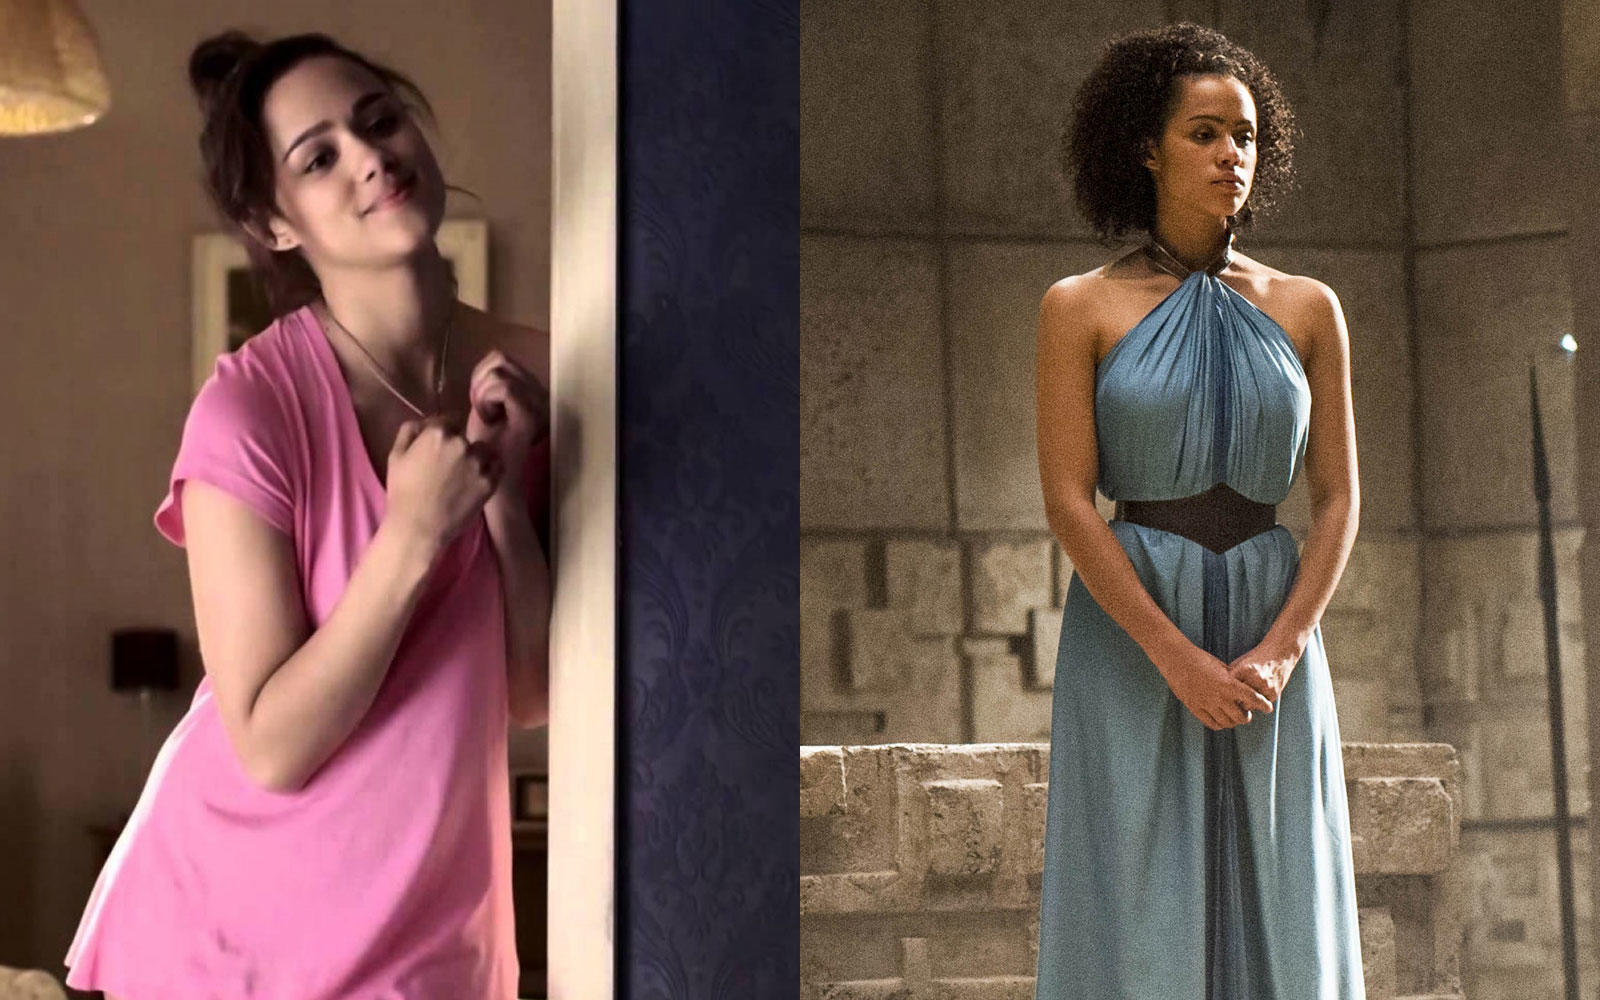 Nathalie Emmanuel made her acting debut at the age of 10 in the West End pr...